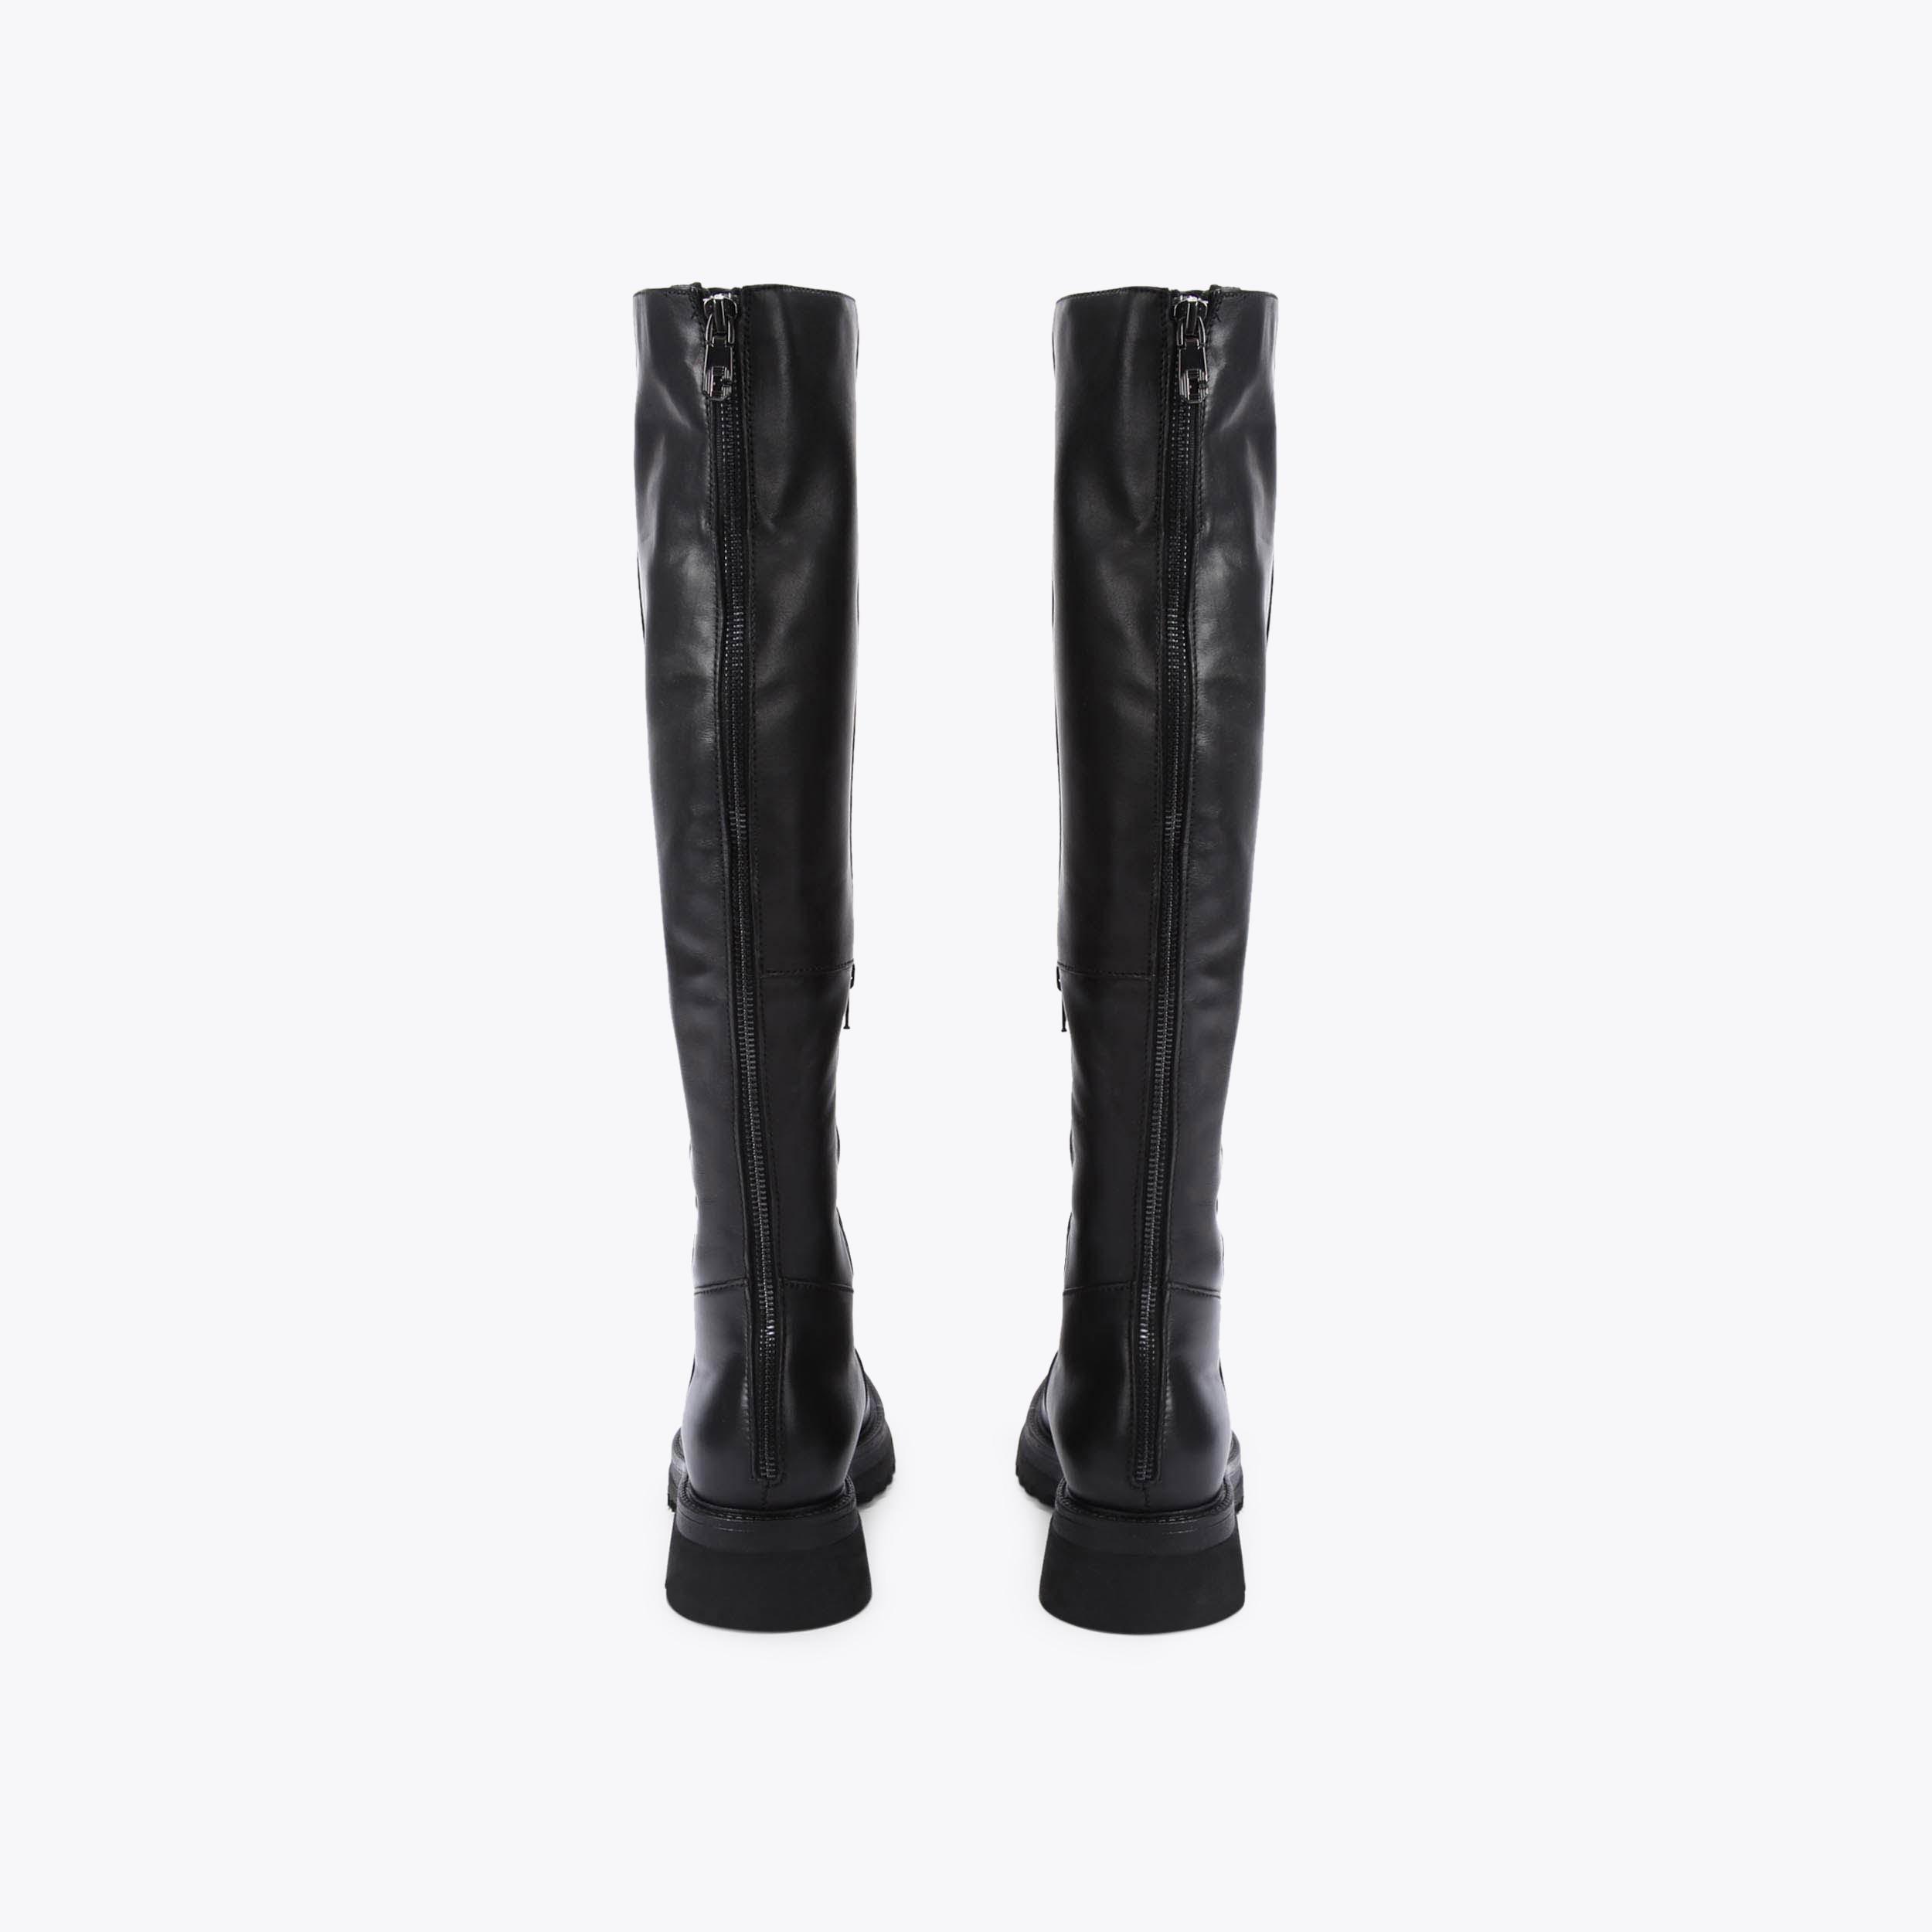 STRONG KNEE HIGH Black Knee High Chunky Leather Boots by CARVELA